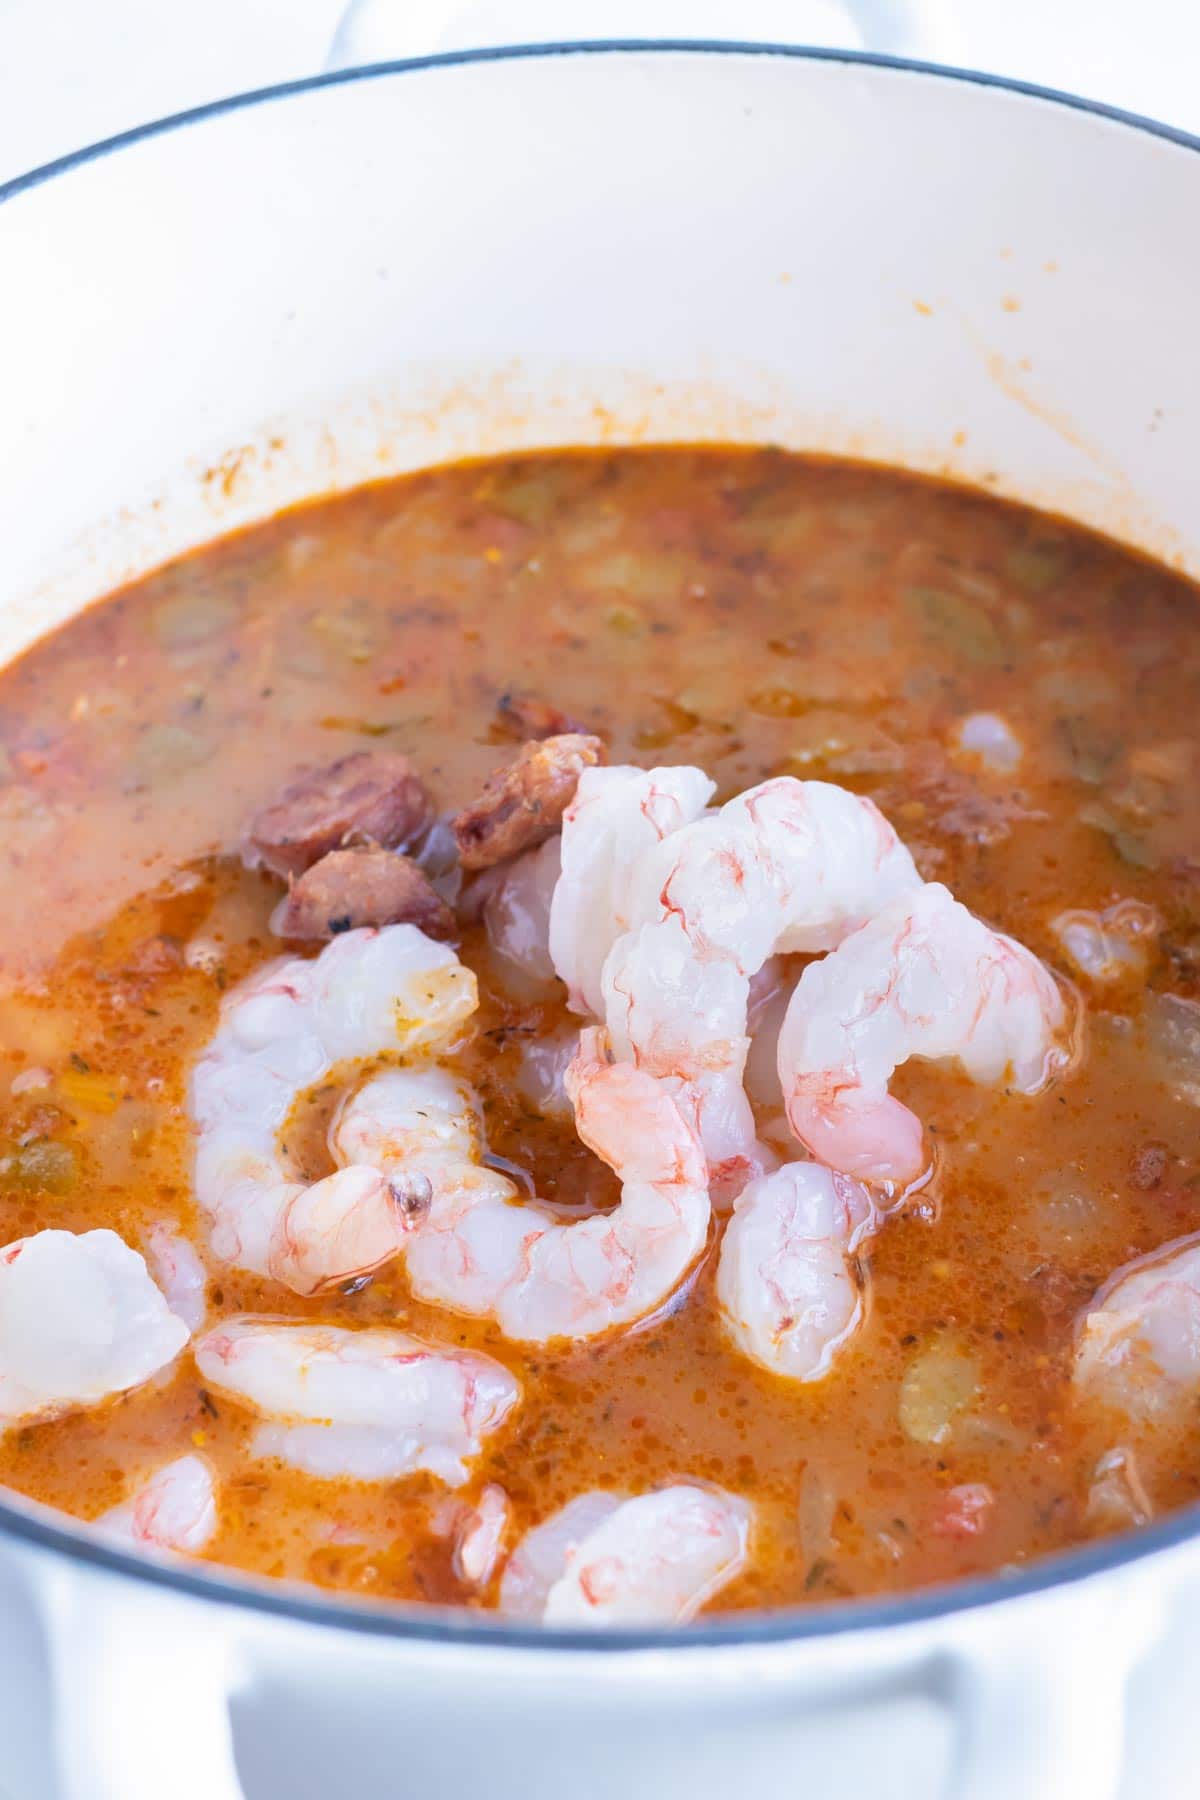 Shrimp is added to the pot for this authentic gumbo recipe.